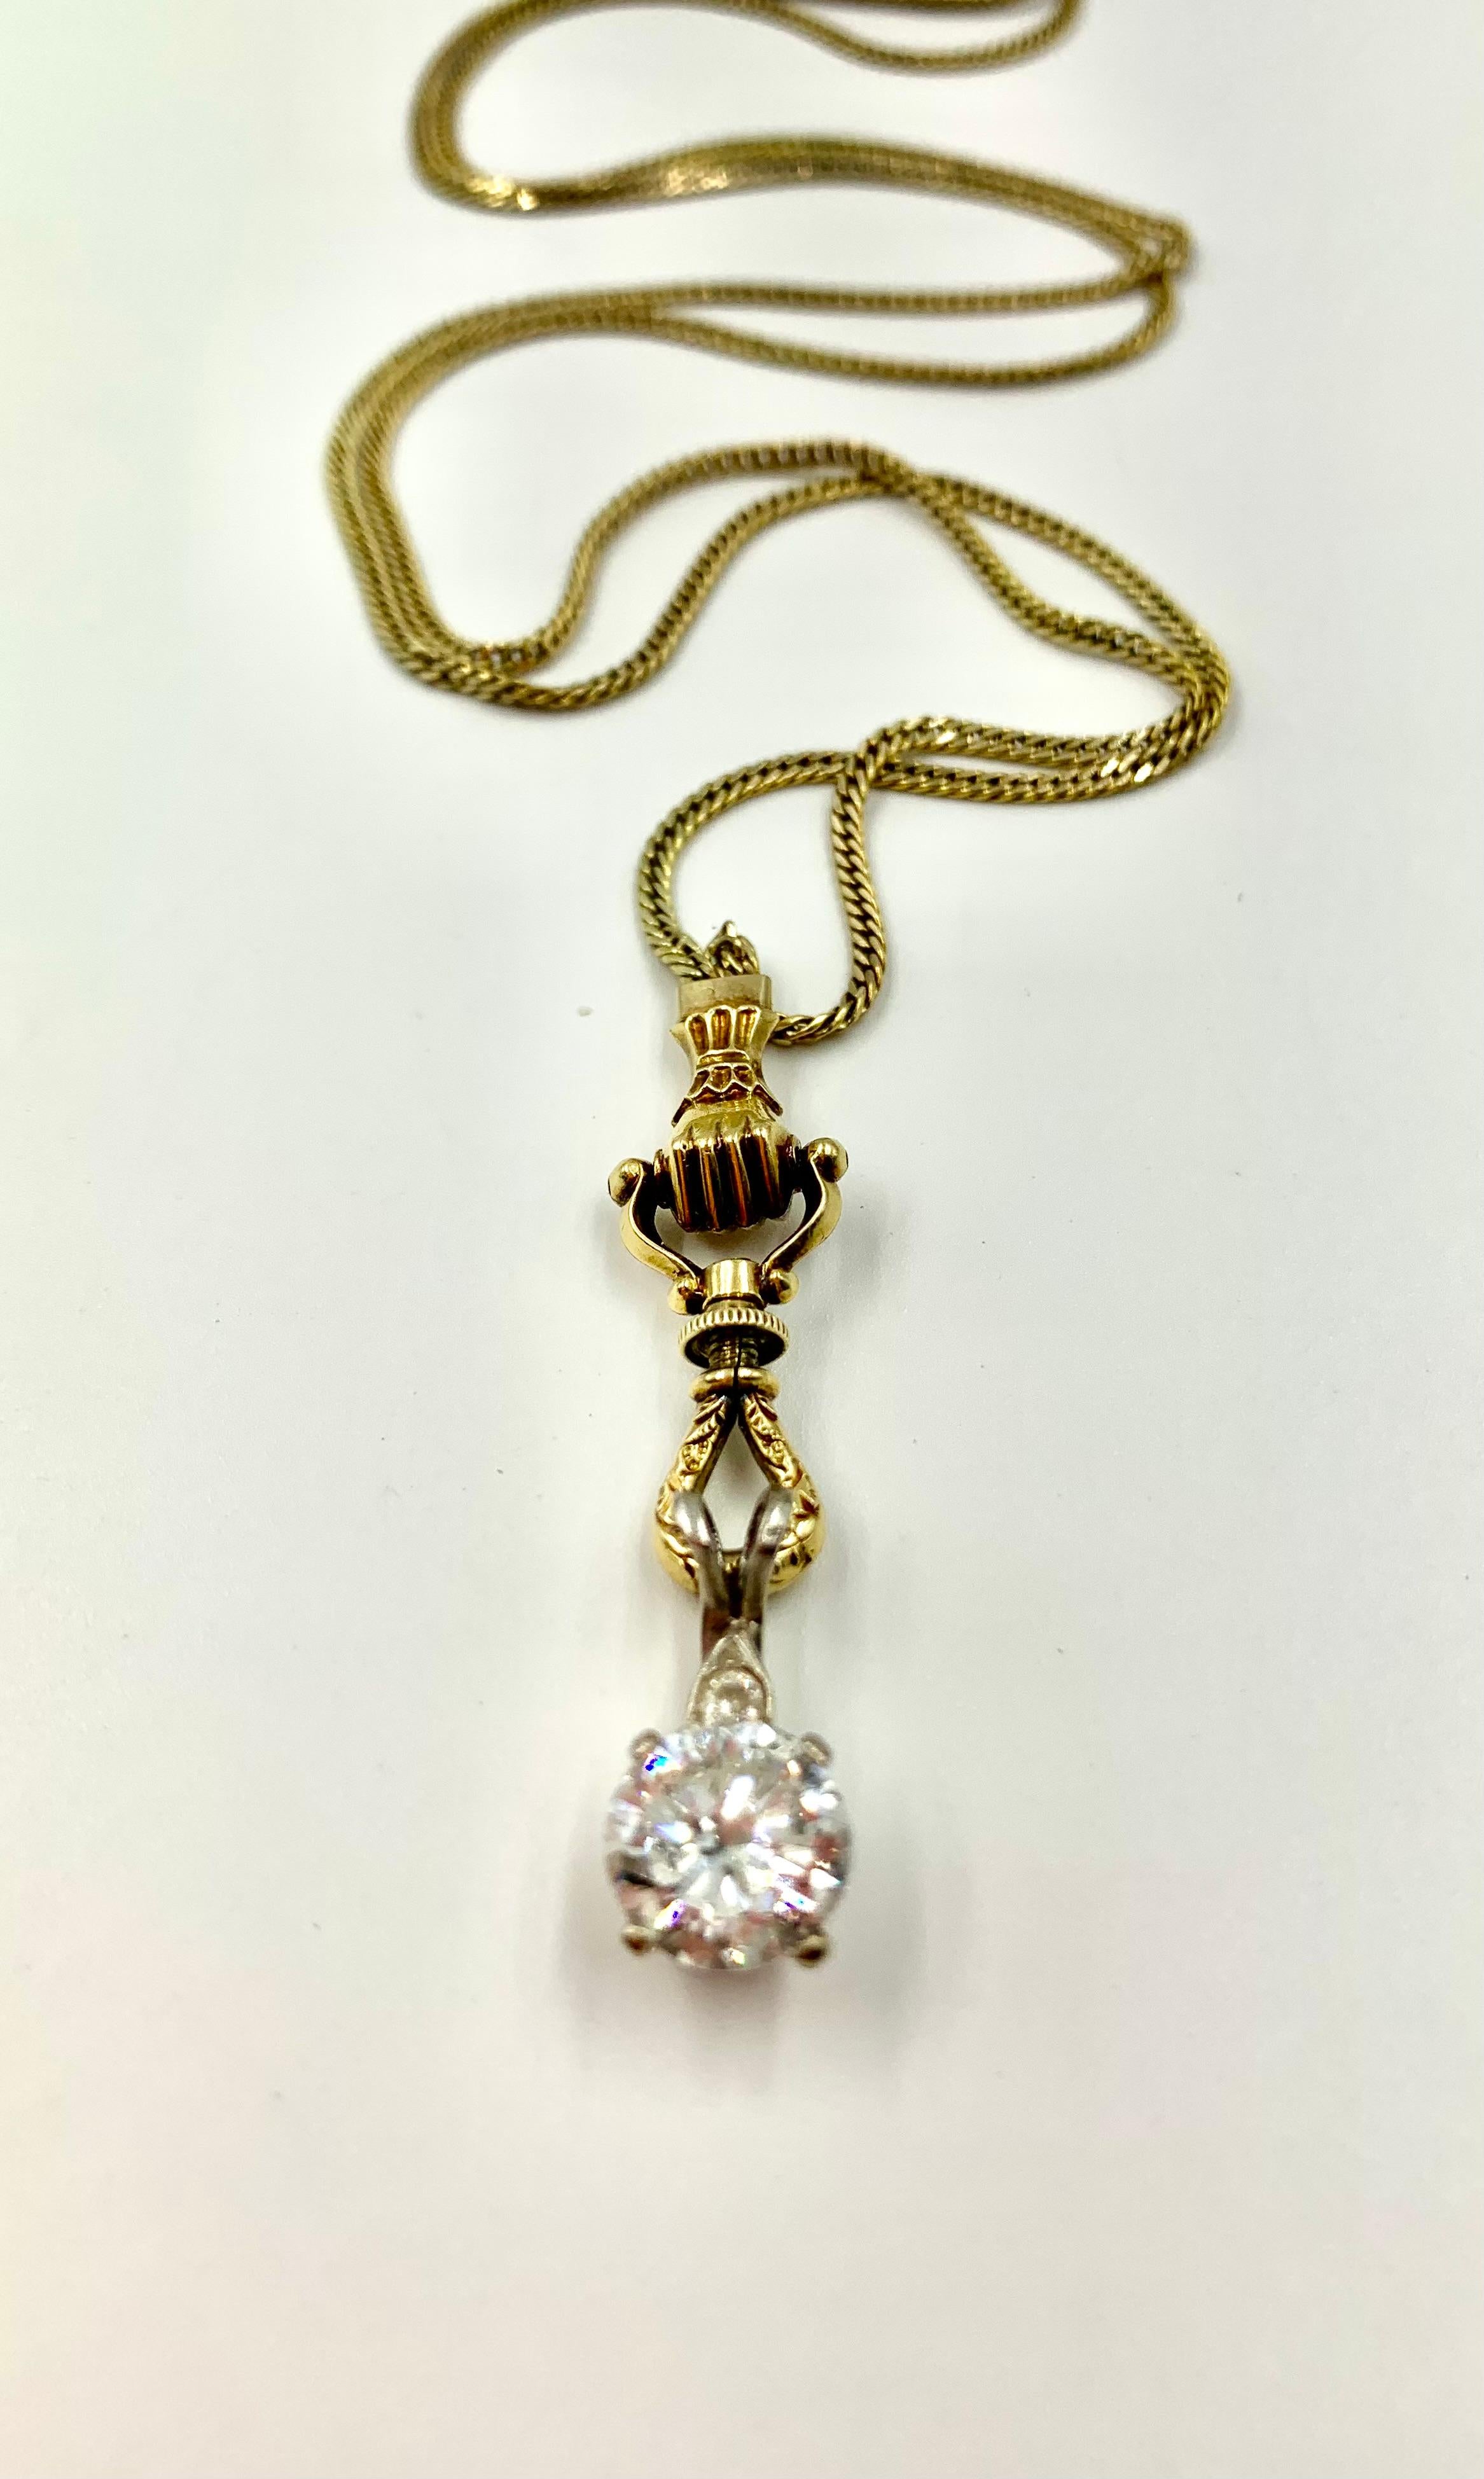 Exceptionally Long Antique 18K Gold Mano Sautoir Slide Chain Necklace Circa 1840 For Sale 4